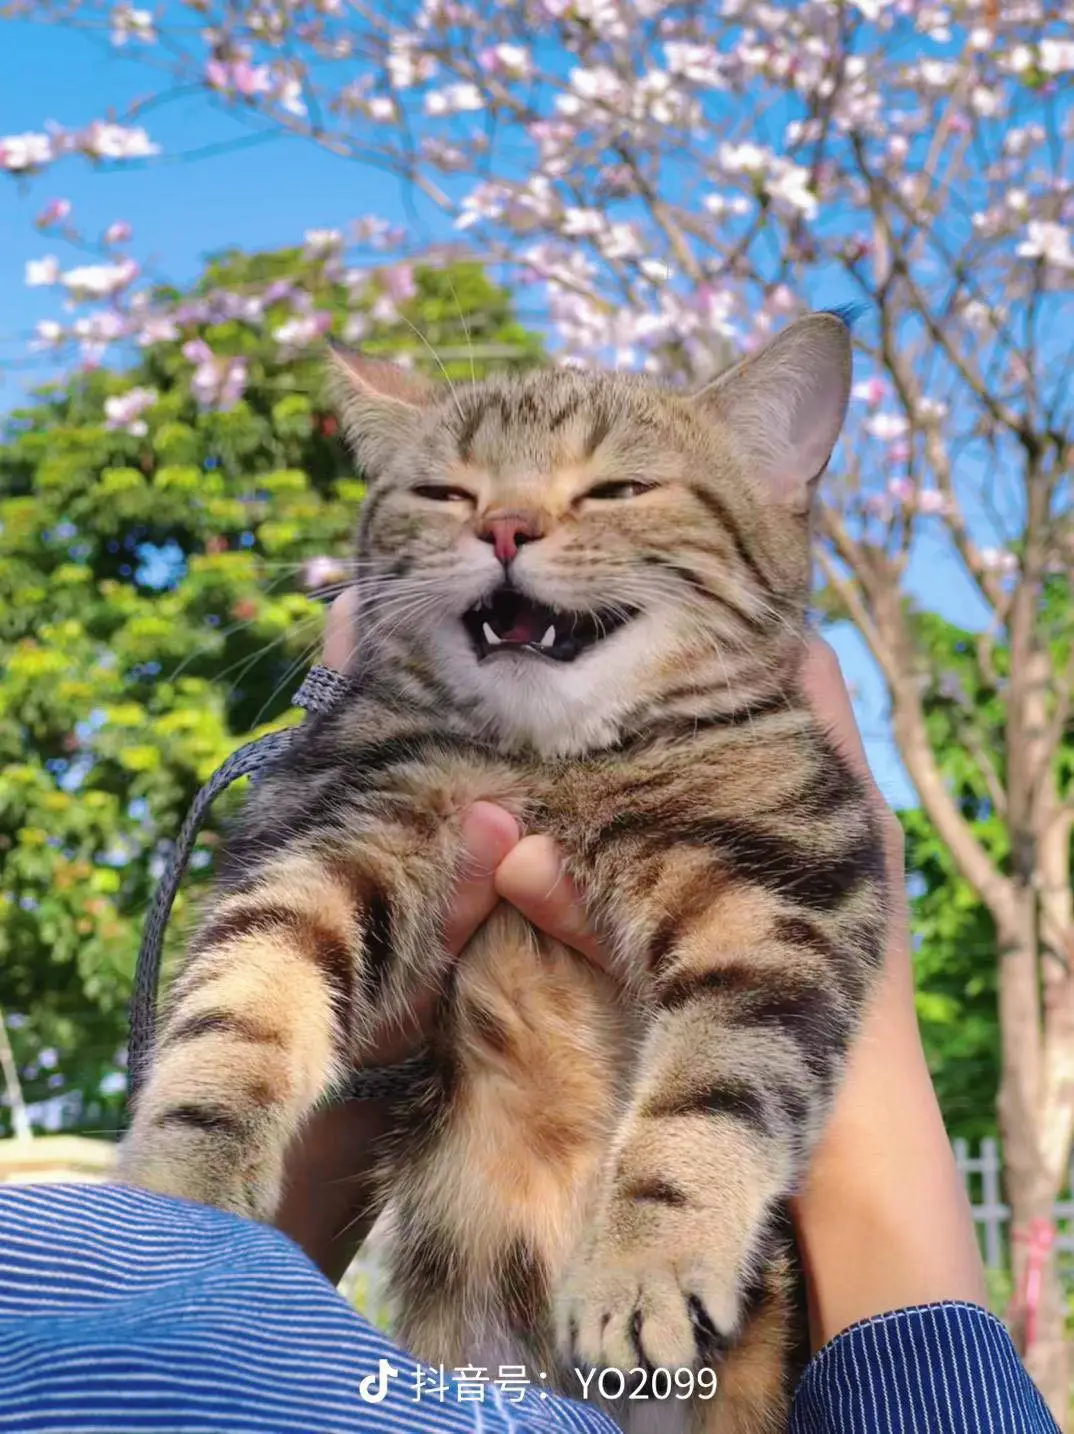 Happy face of the cat when being taken for the first time by its owner to play